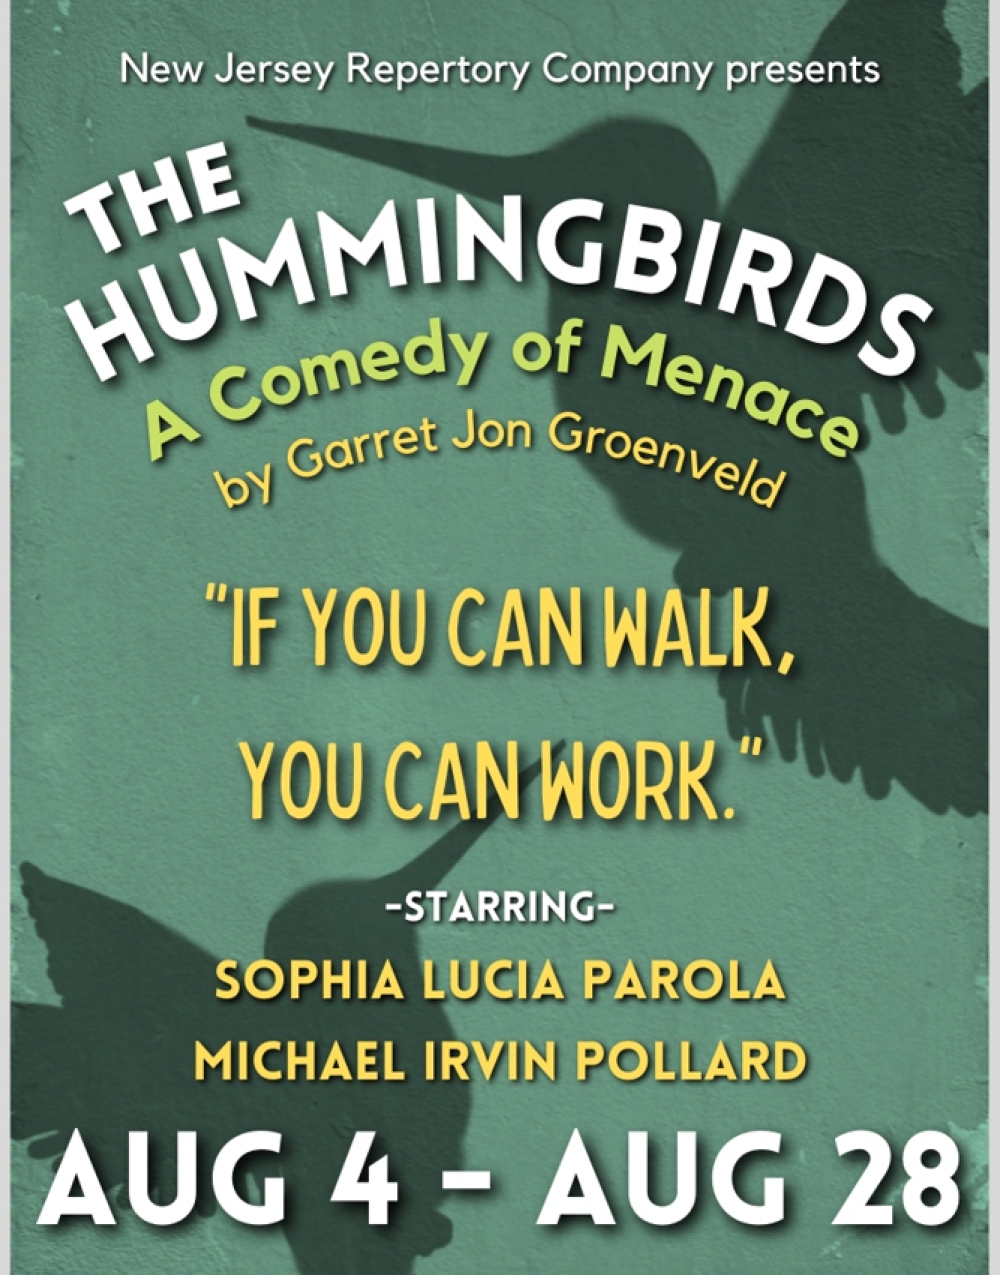 The Hummingbirds: A Comedy of Menace - New Jersey Repertory Company Stage Mag